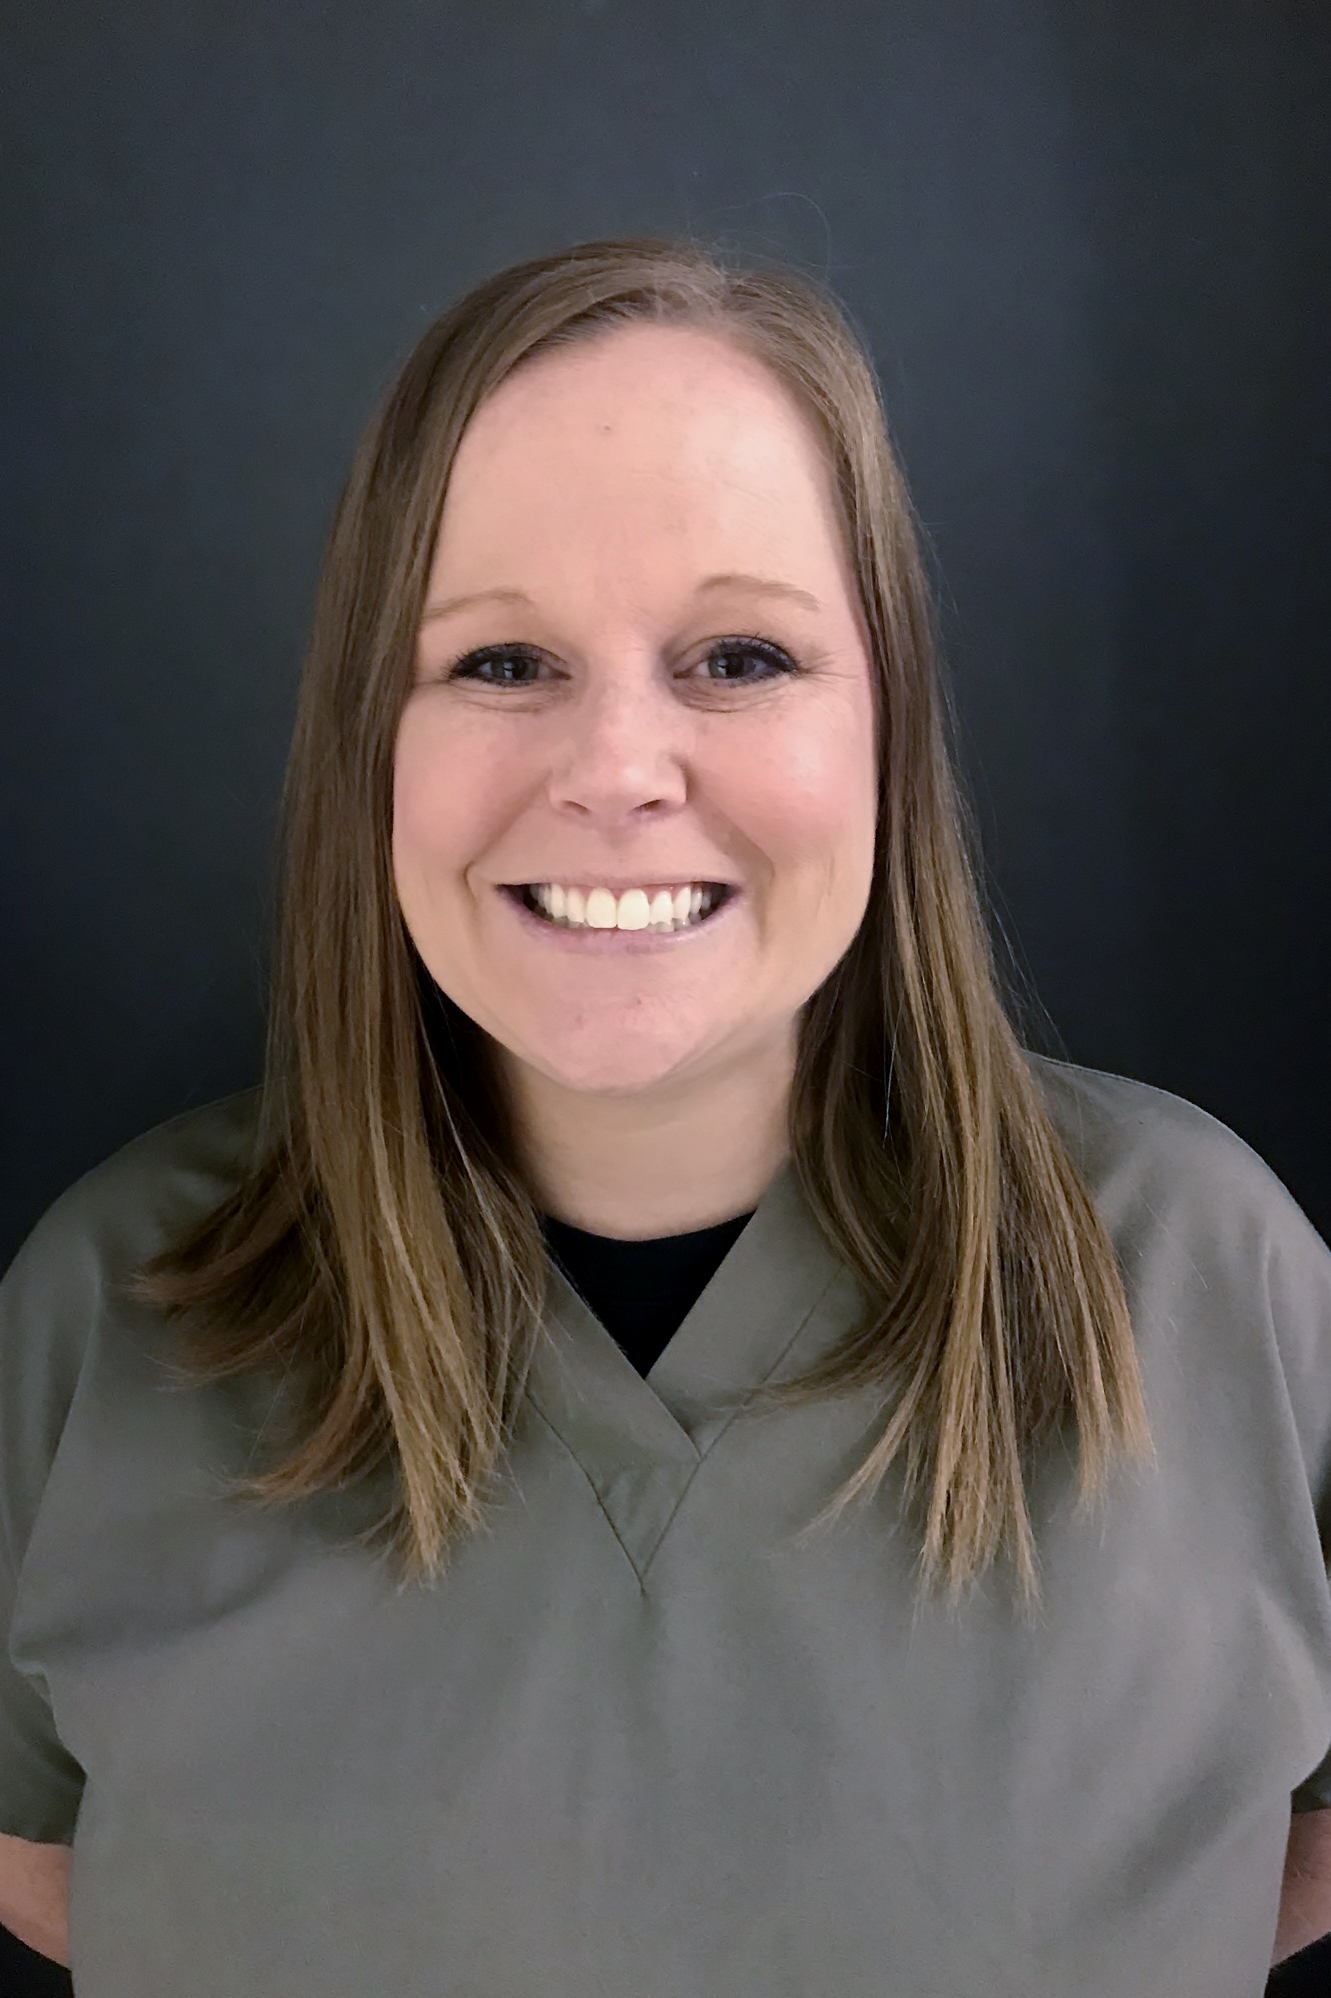 Headshot photograph of Courtnie Trone of Laboratory Services